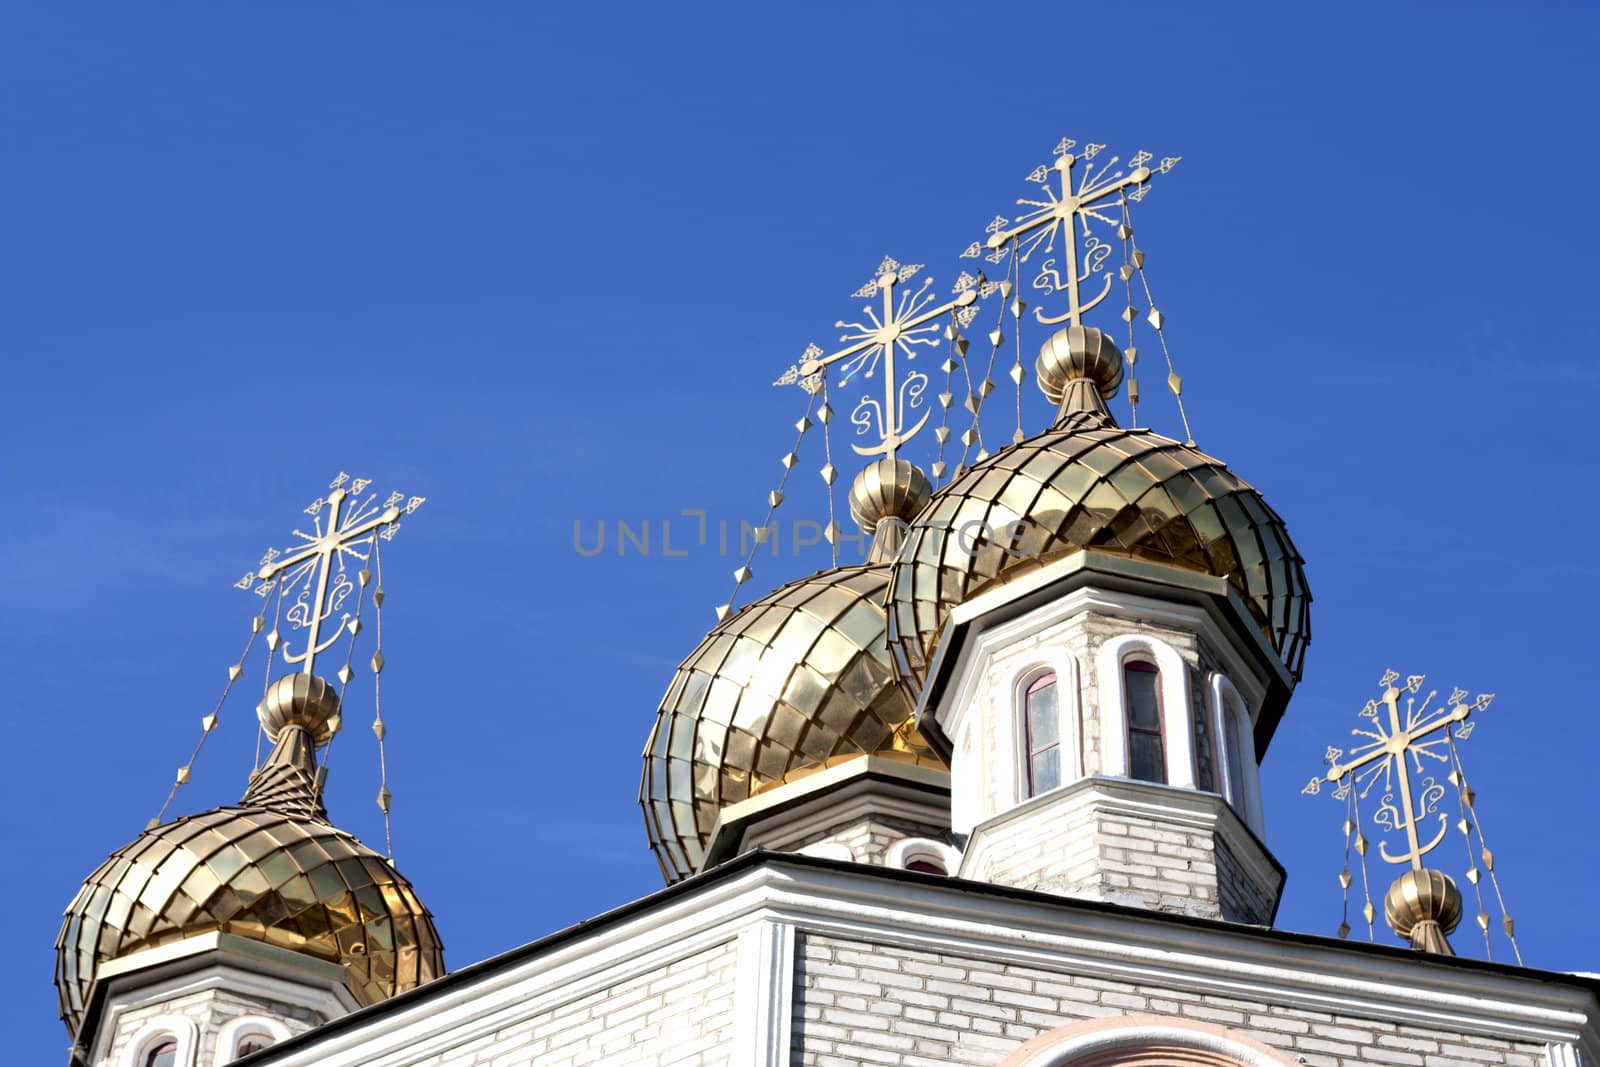 Golden dome of the Orthodox church with blue sky background, Rus by schankz